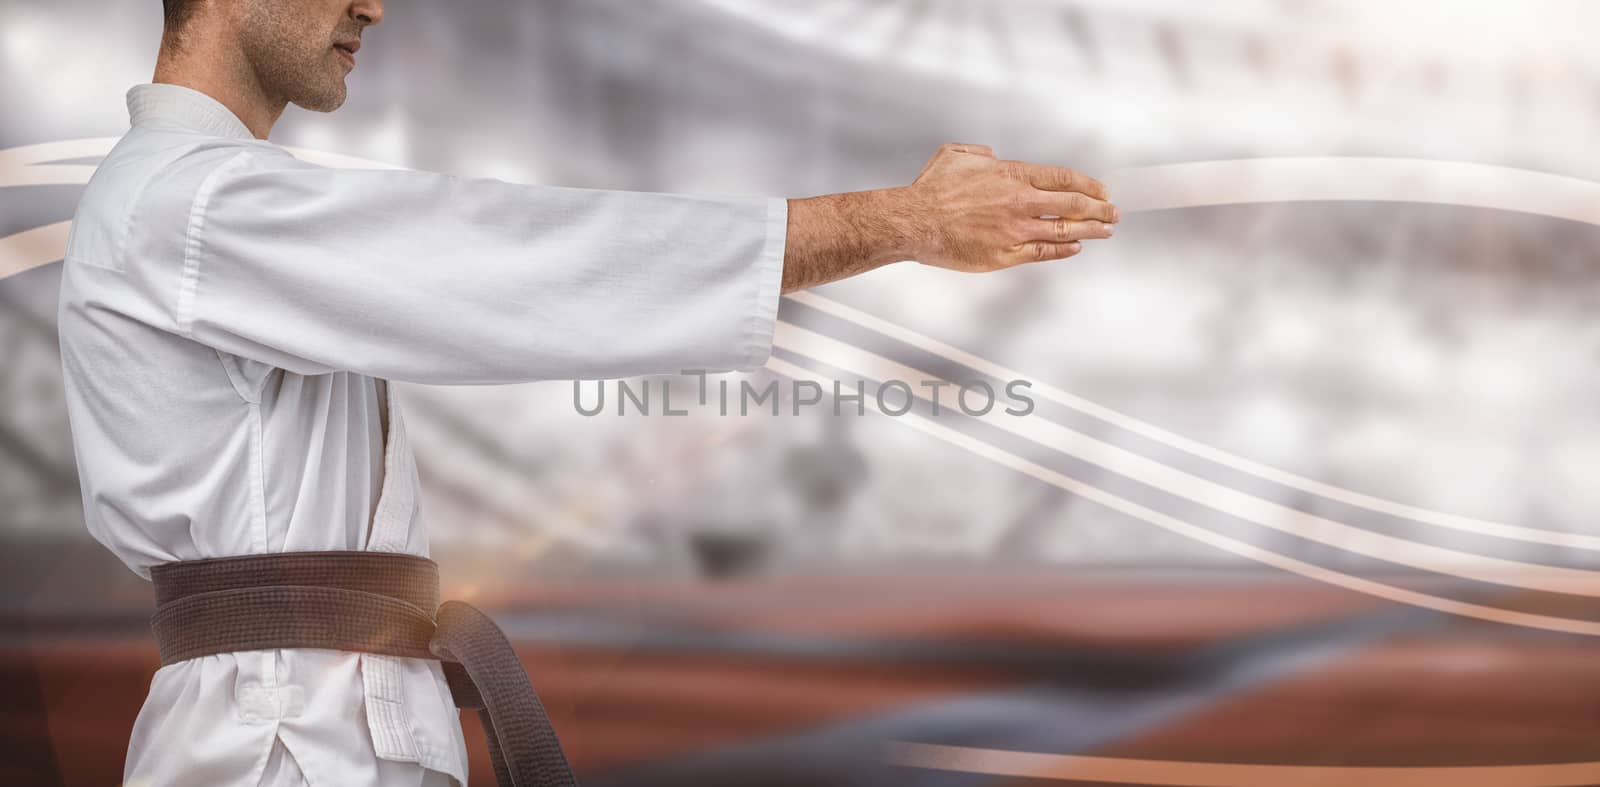 Mid section of fighter performing karate stance against composite image of american stadium